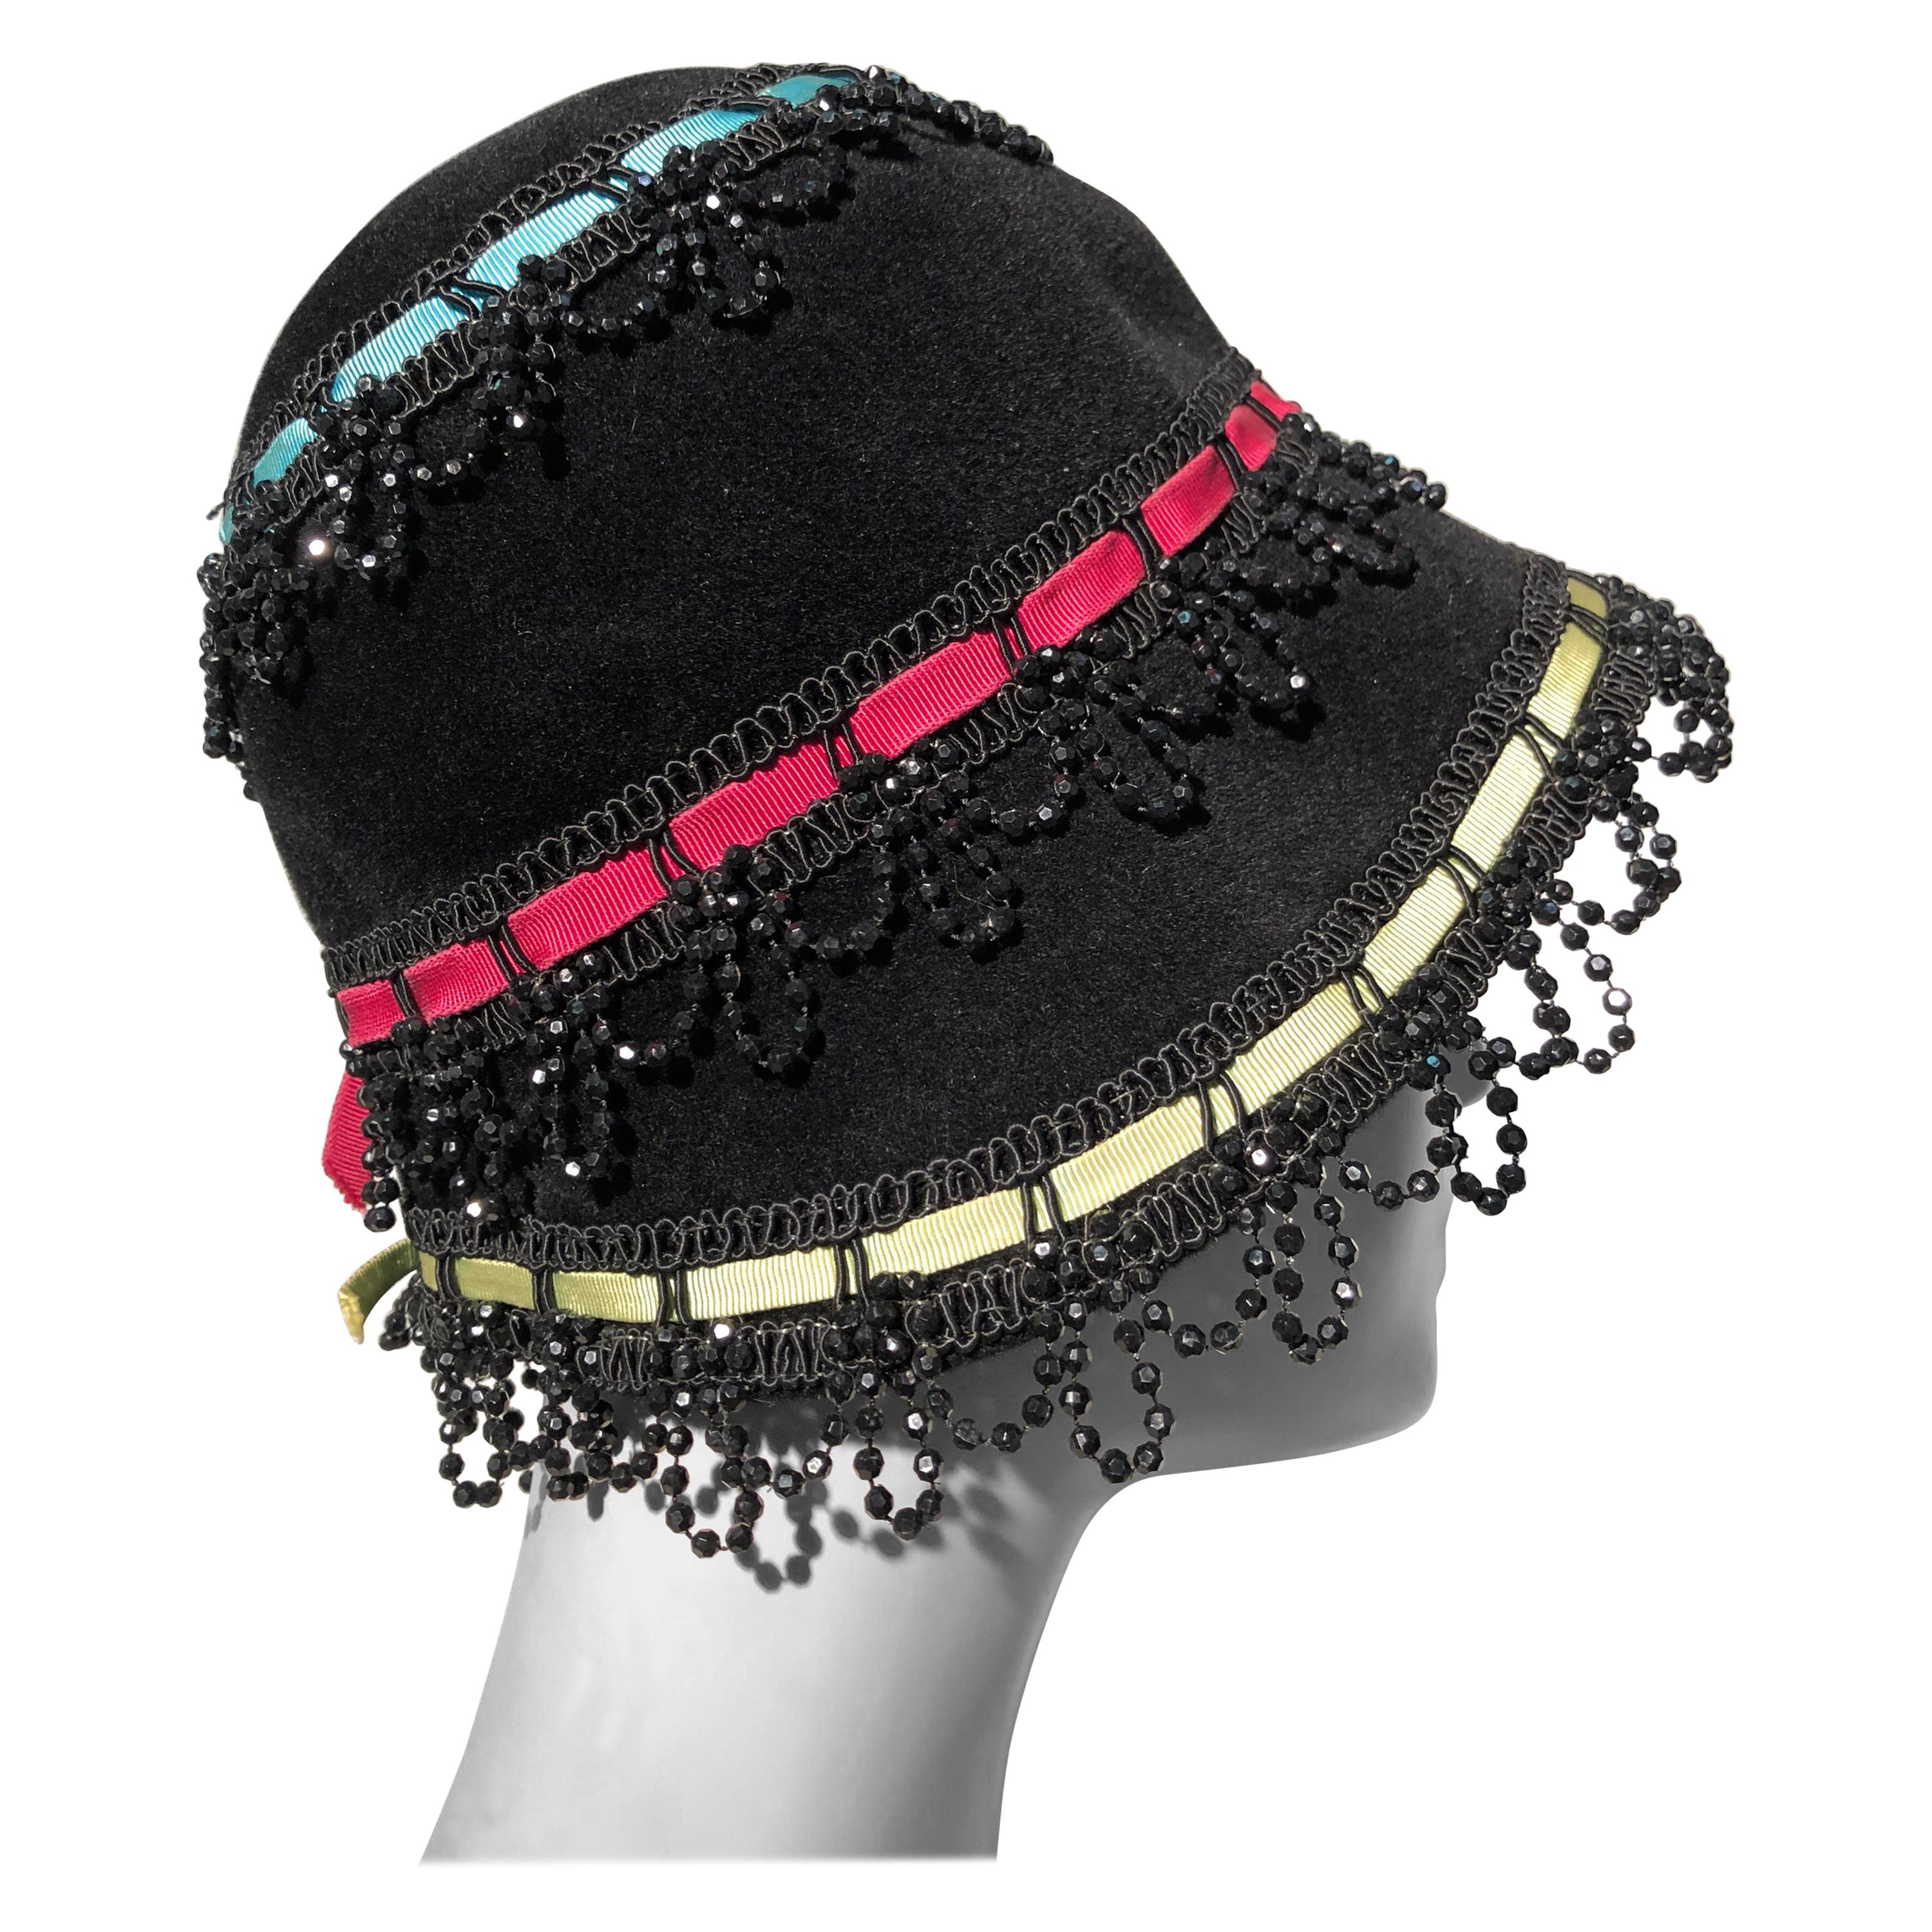 Yves Saint Laurent Black Felt Bucket Hat With Color Ribbons and Bead Trim, 1960s